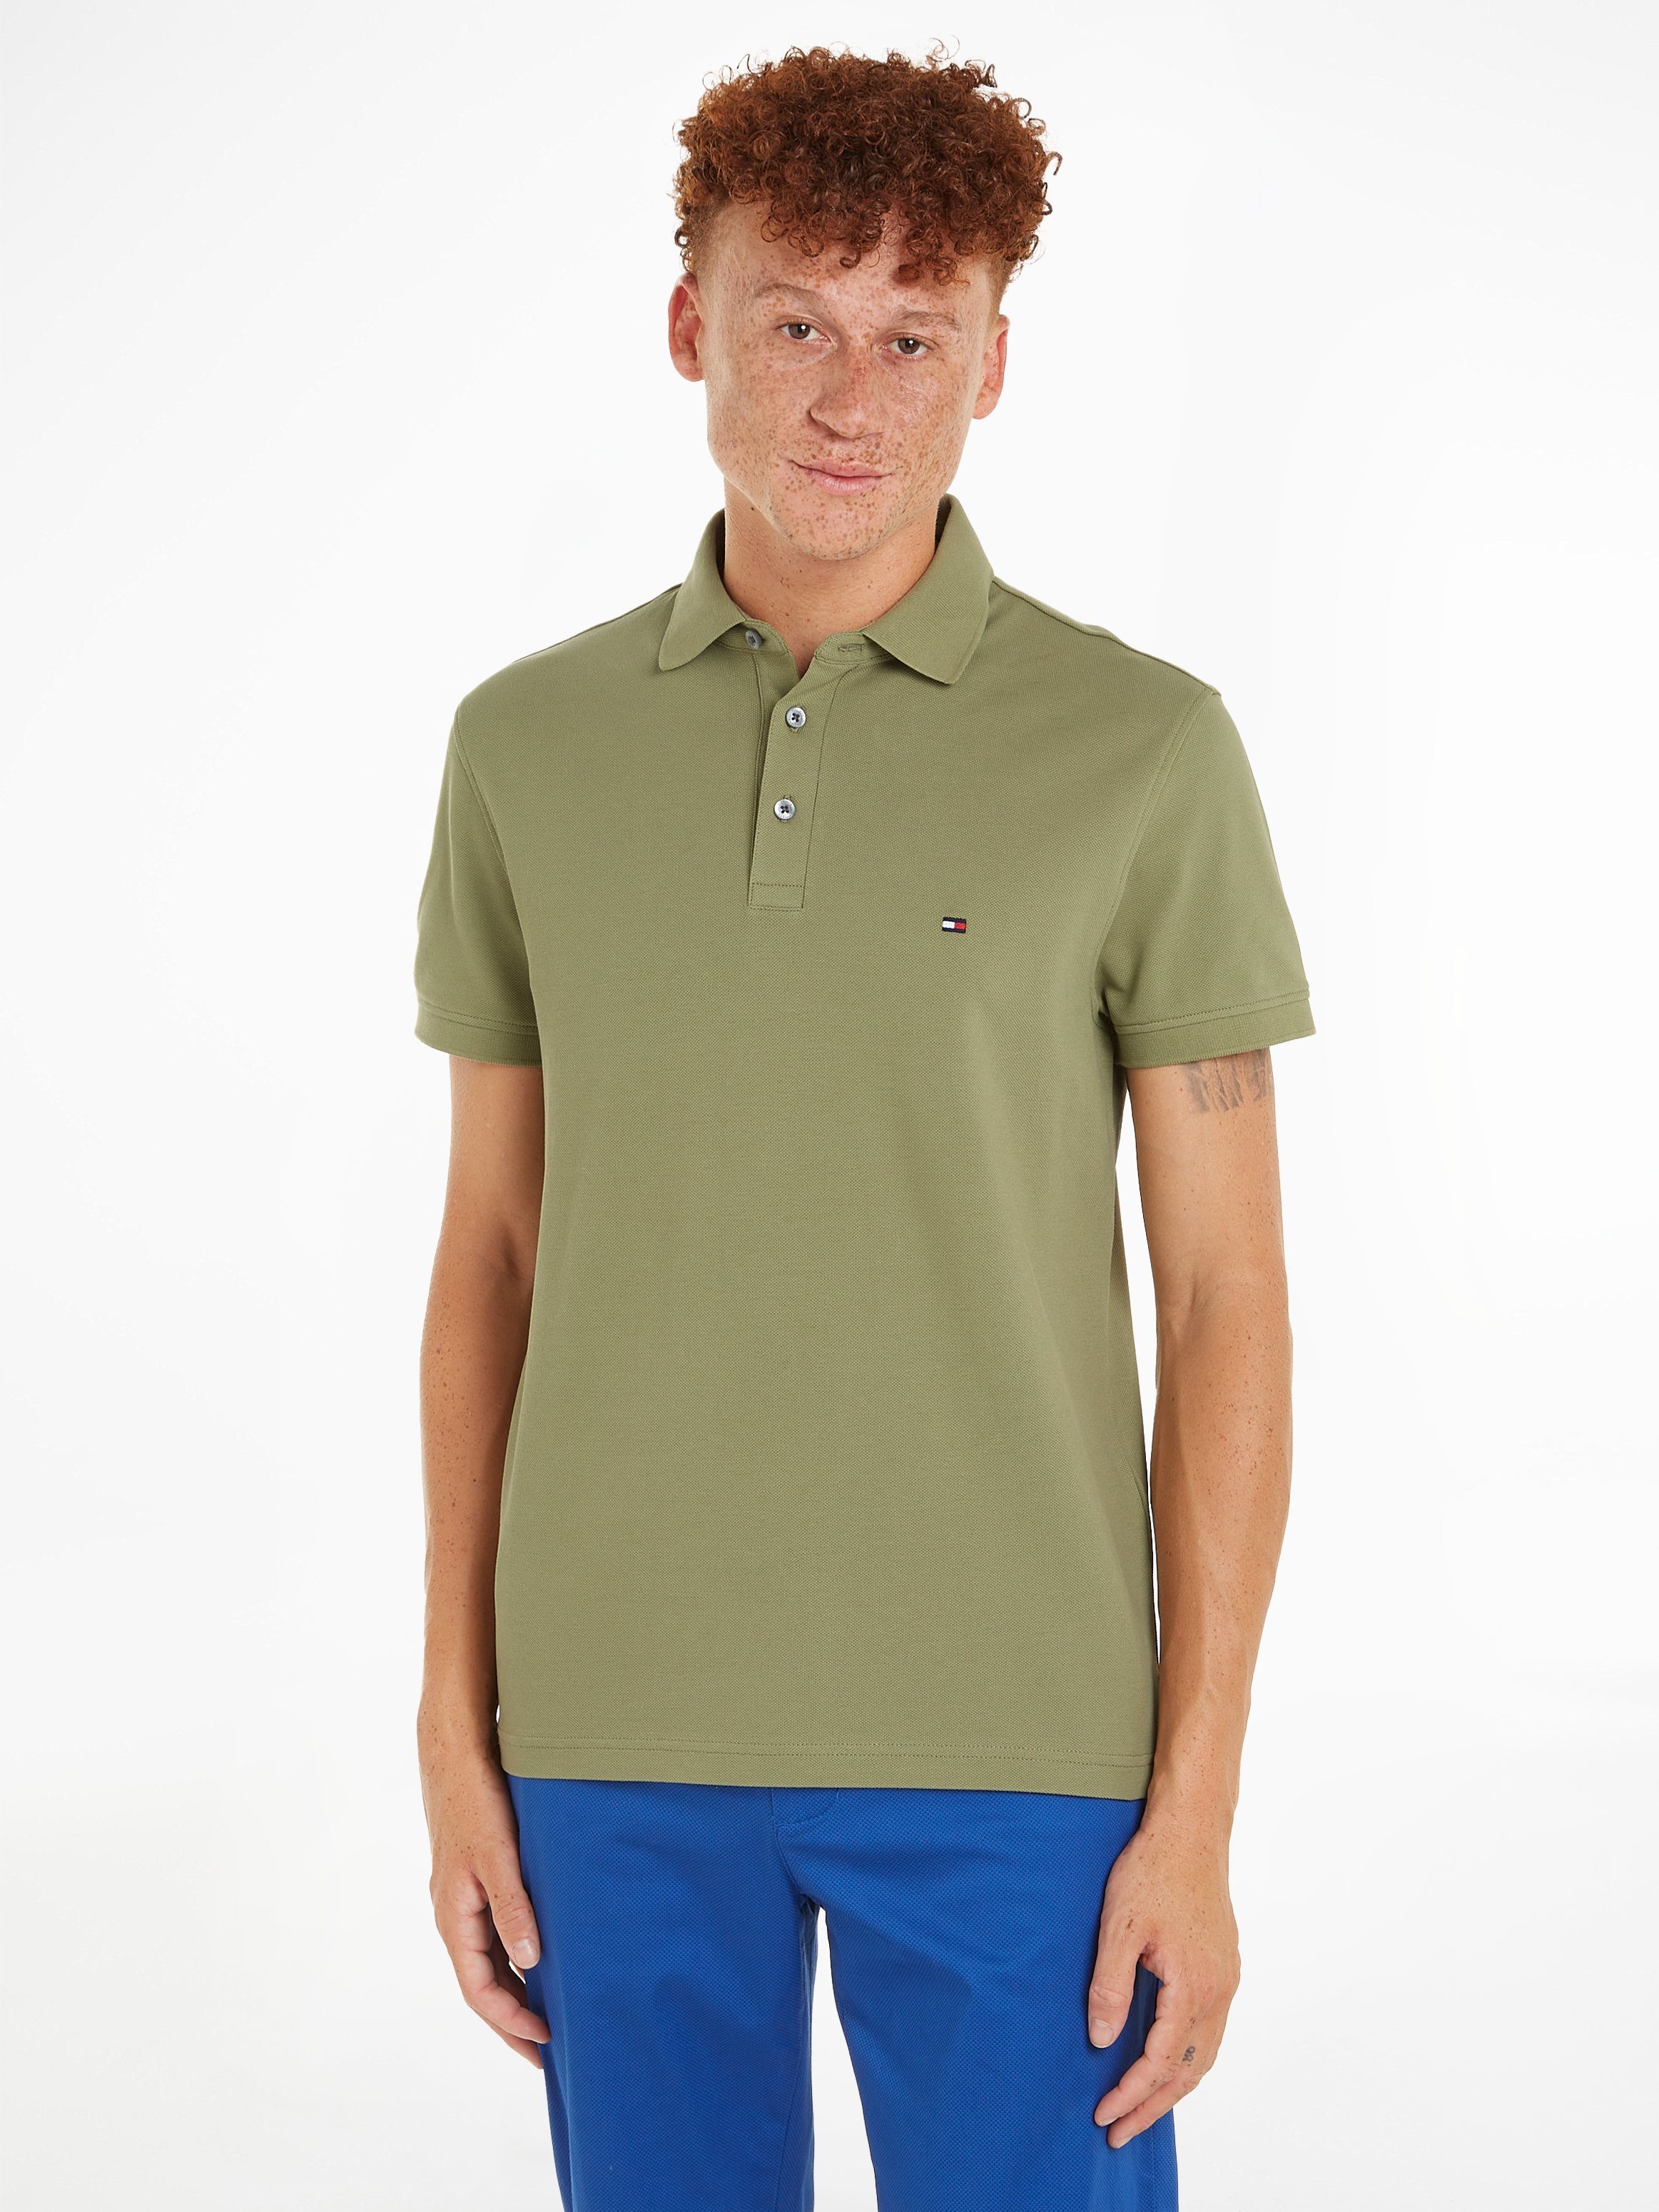 Tommy Hilfiger Poloshirt 1985 SLIM Logostickerei POLO Faded Olive mit